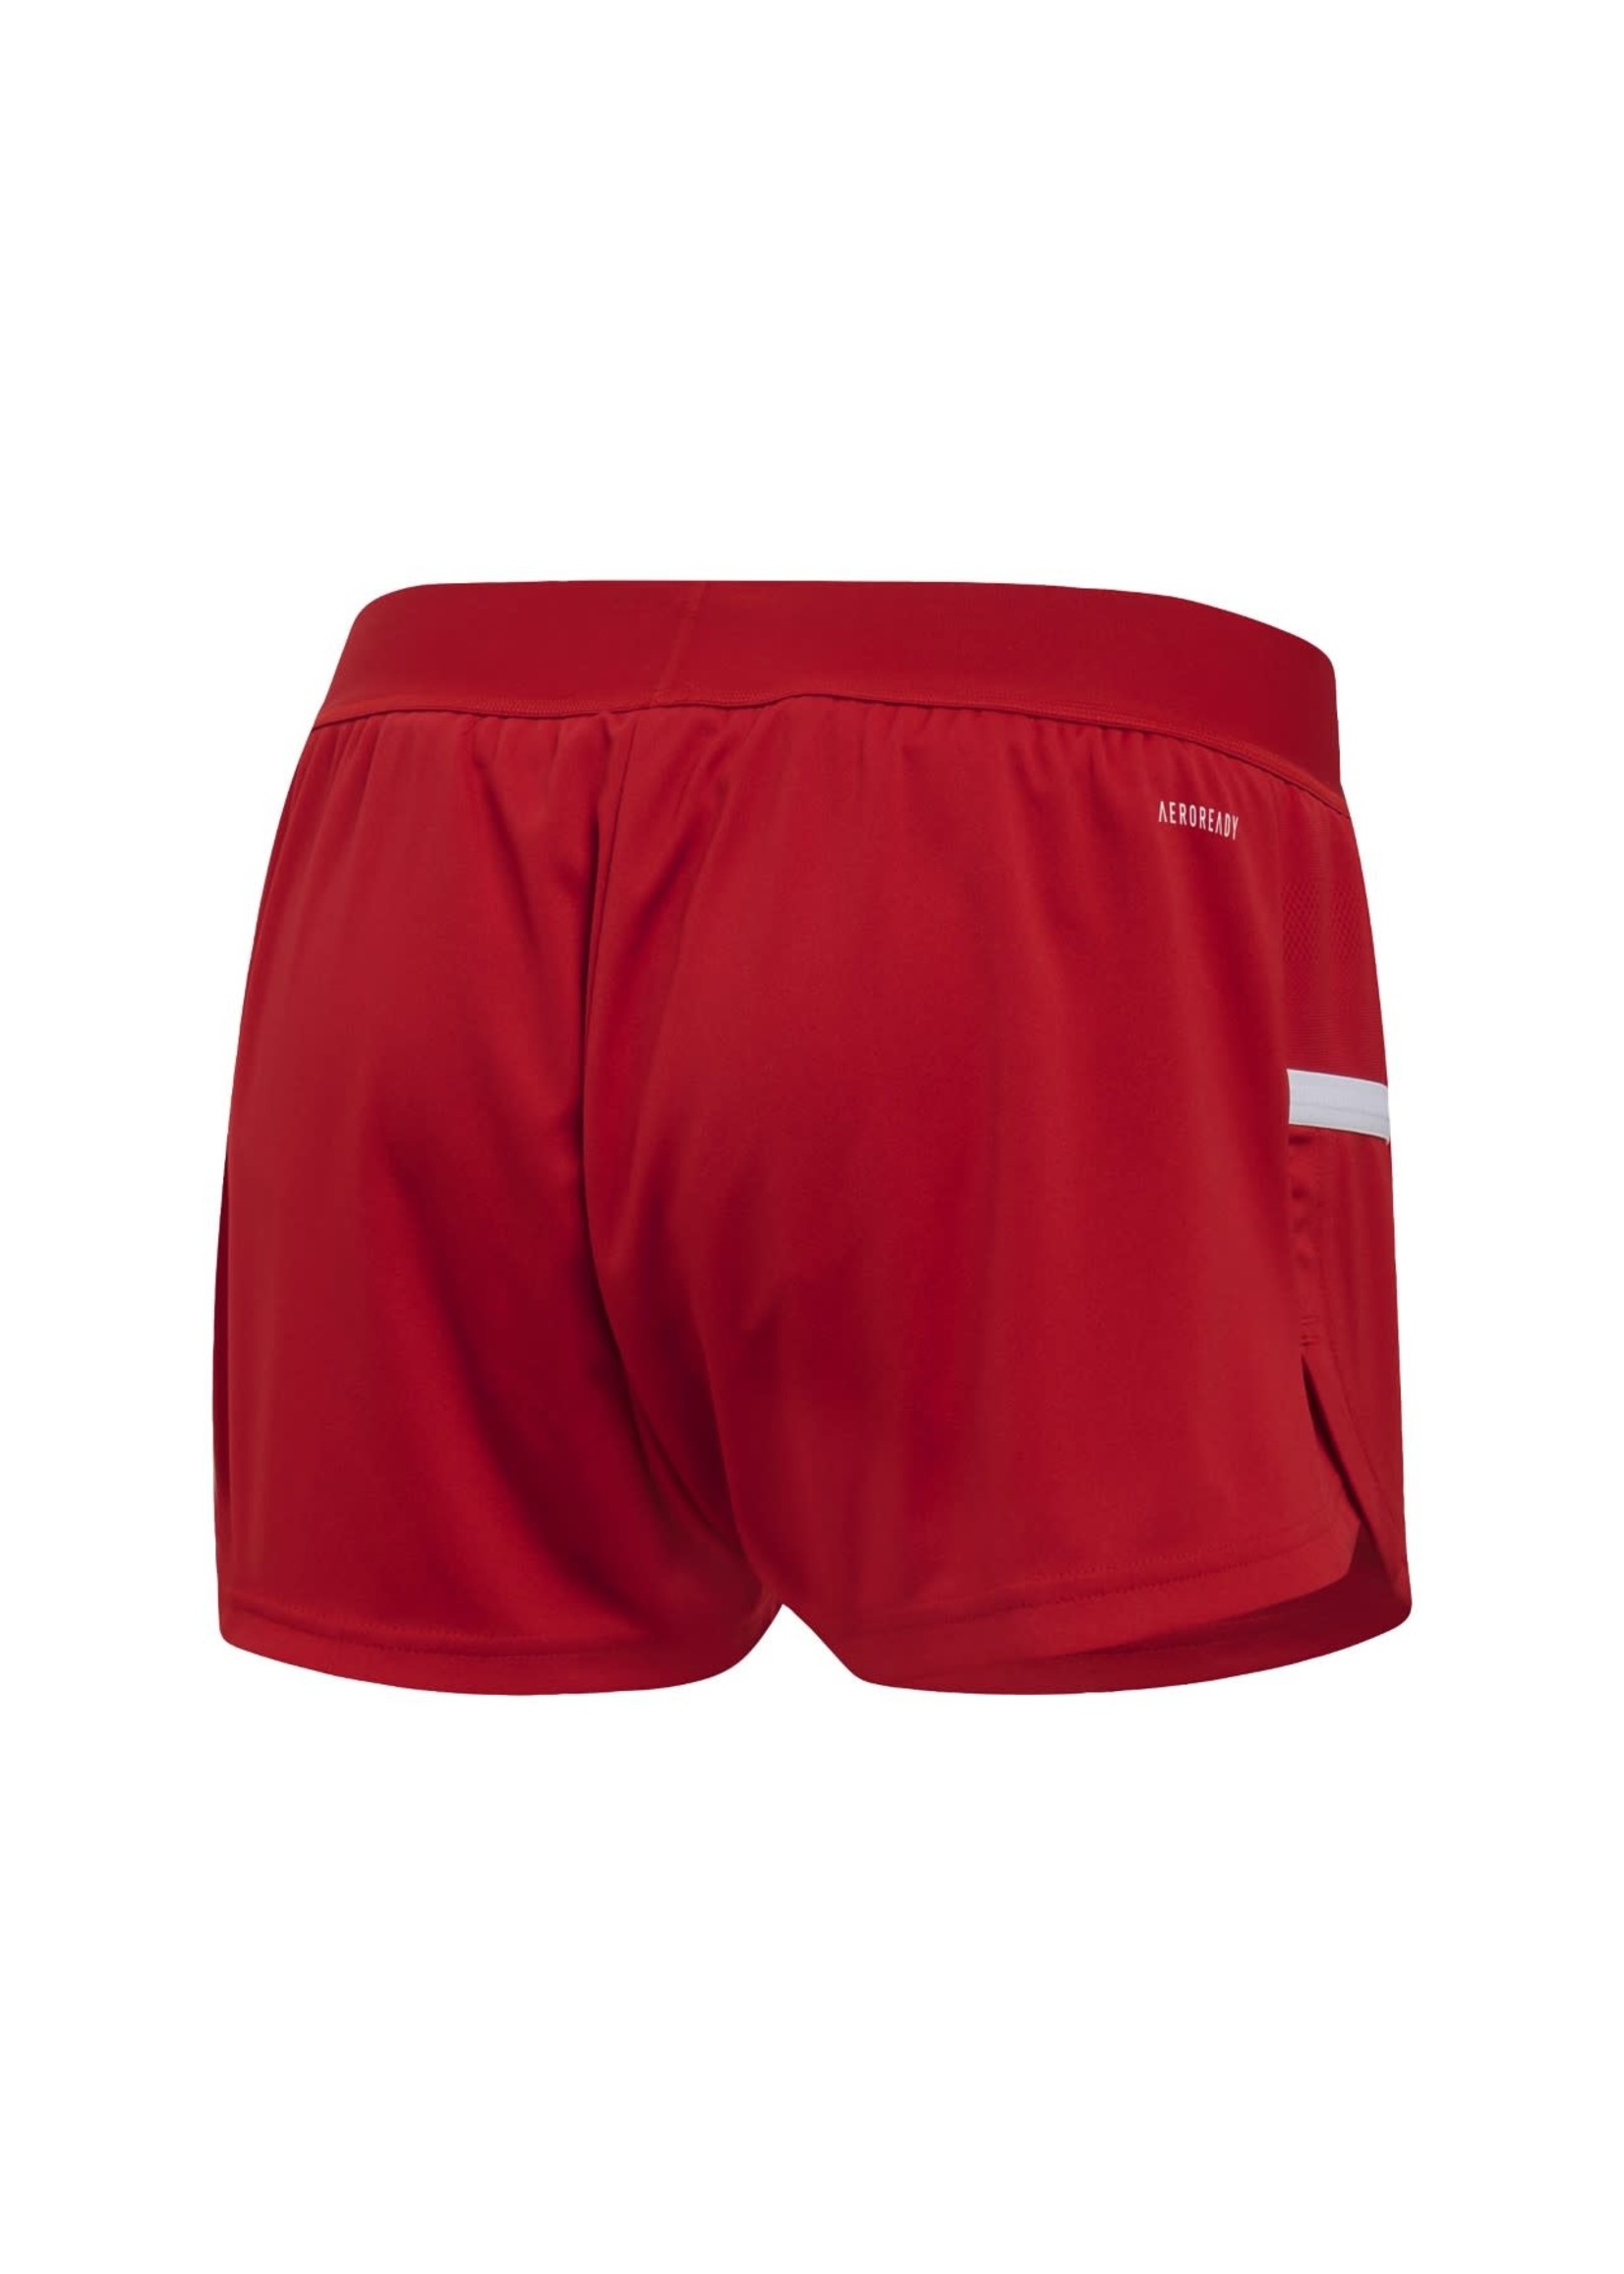 adidas Aeroready Athletic Shorts Women's Red/White New with Tags